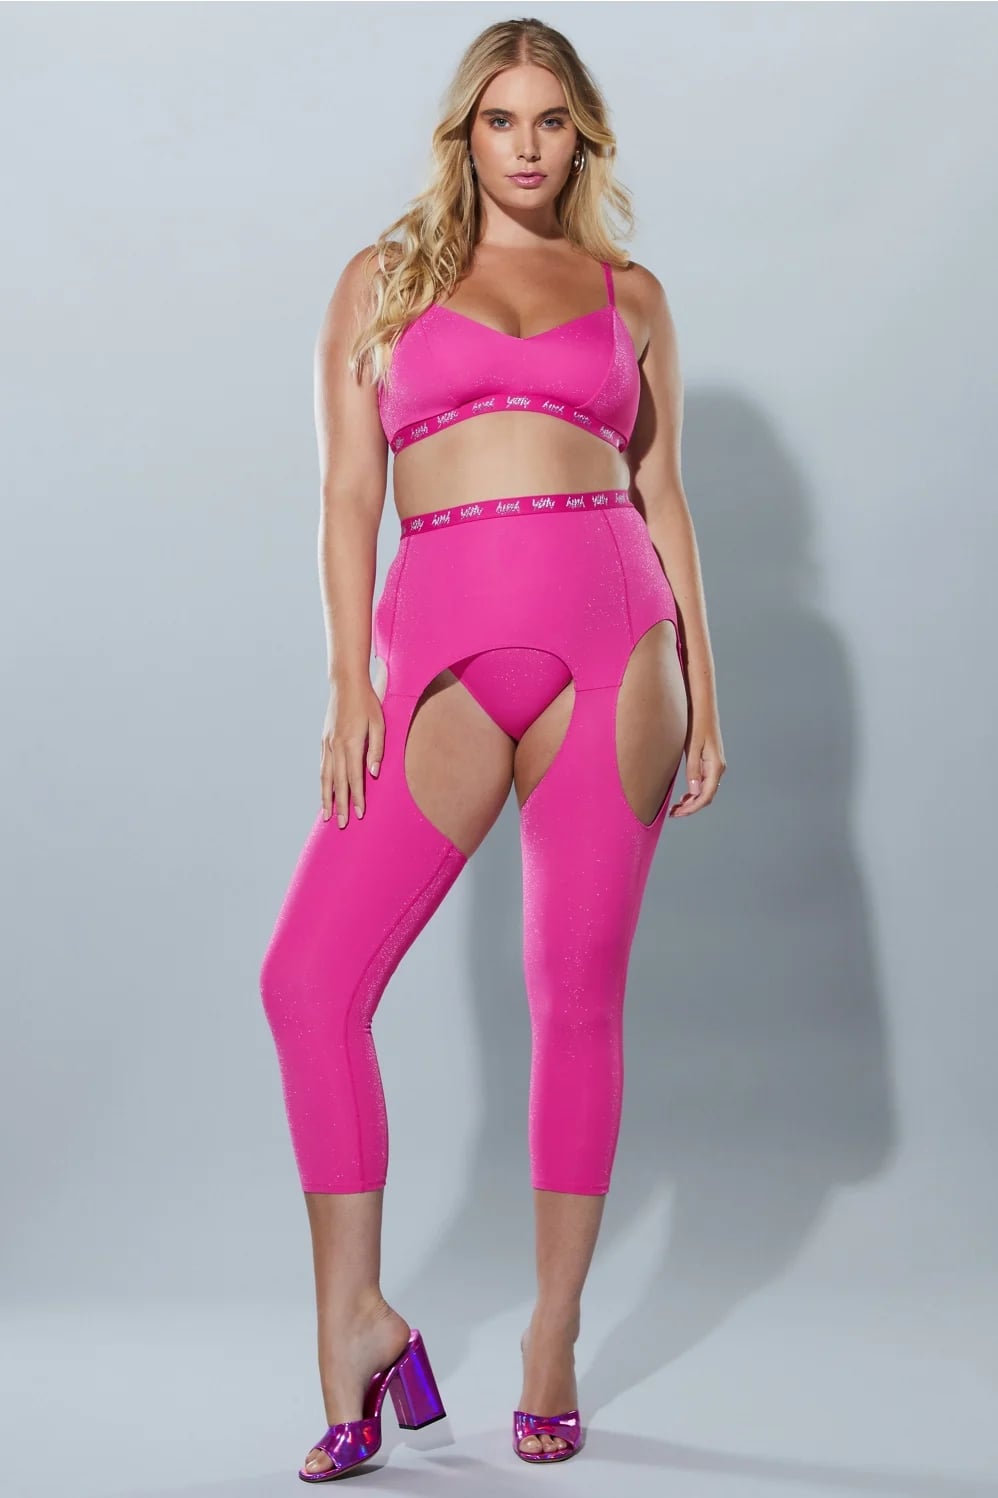 Tights – Pink Boutique UK